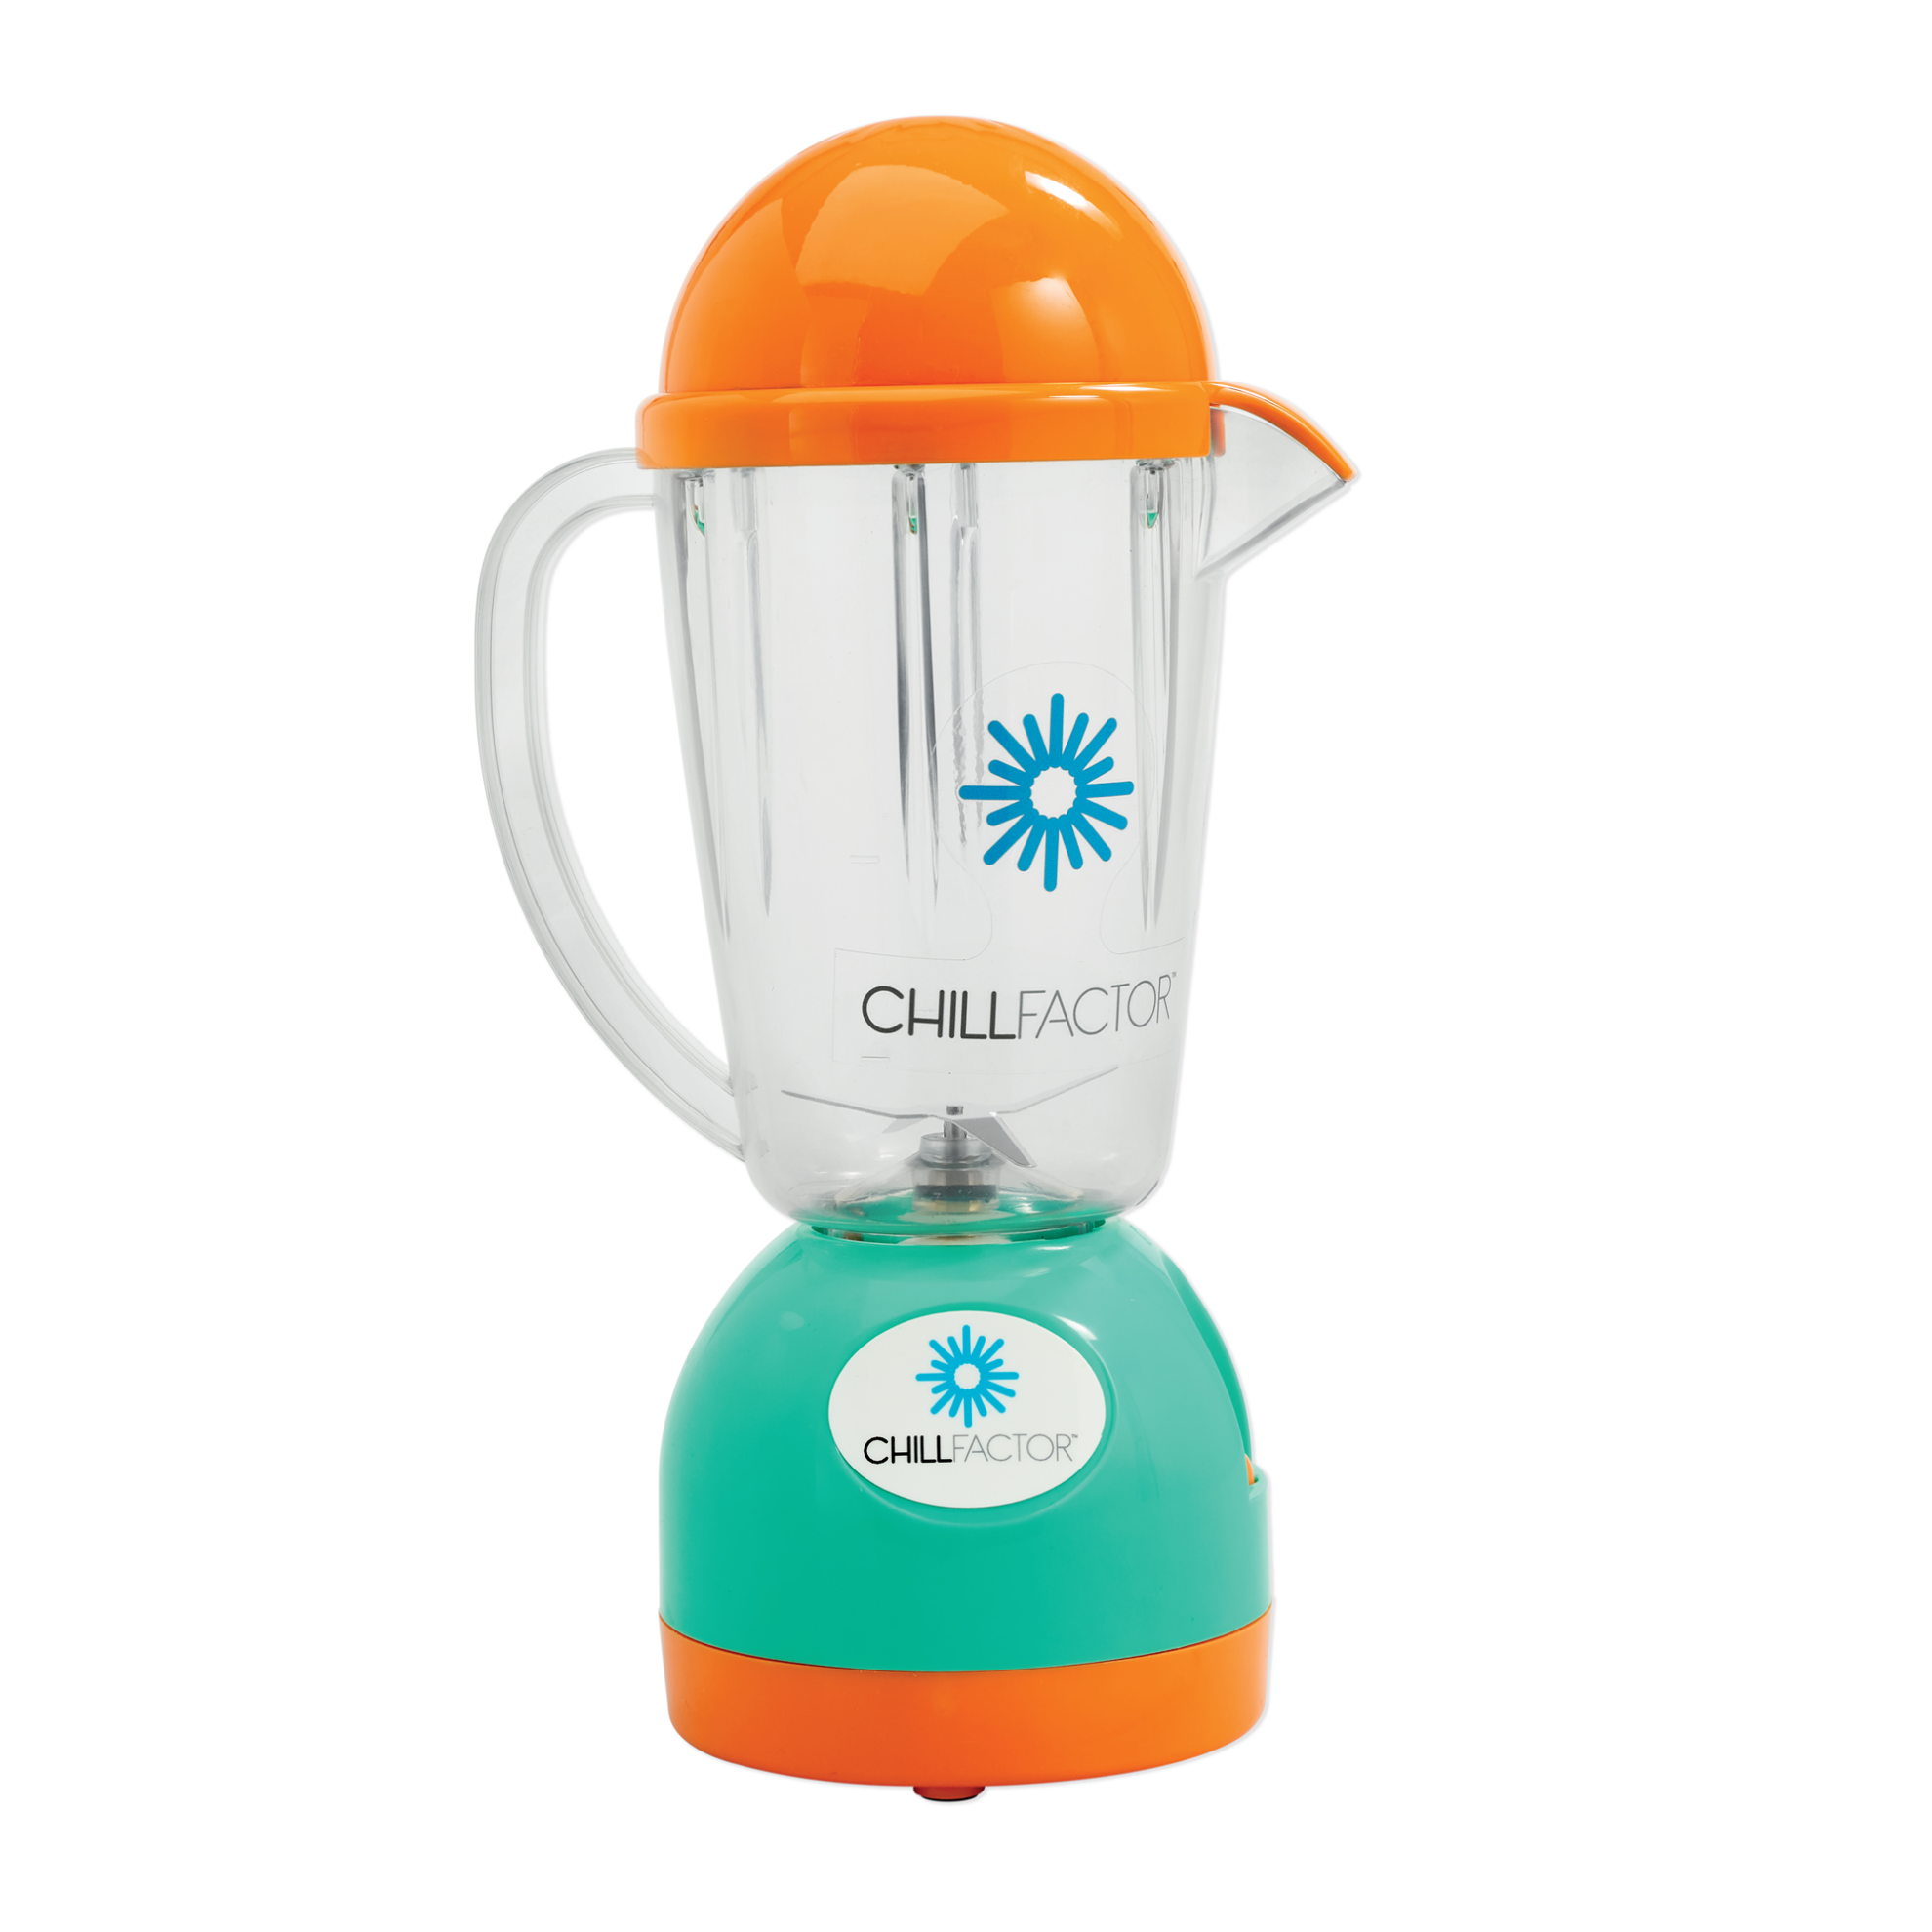 Chill Factor Milkshake and Smoothie Maker Toys from Character